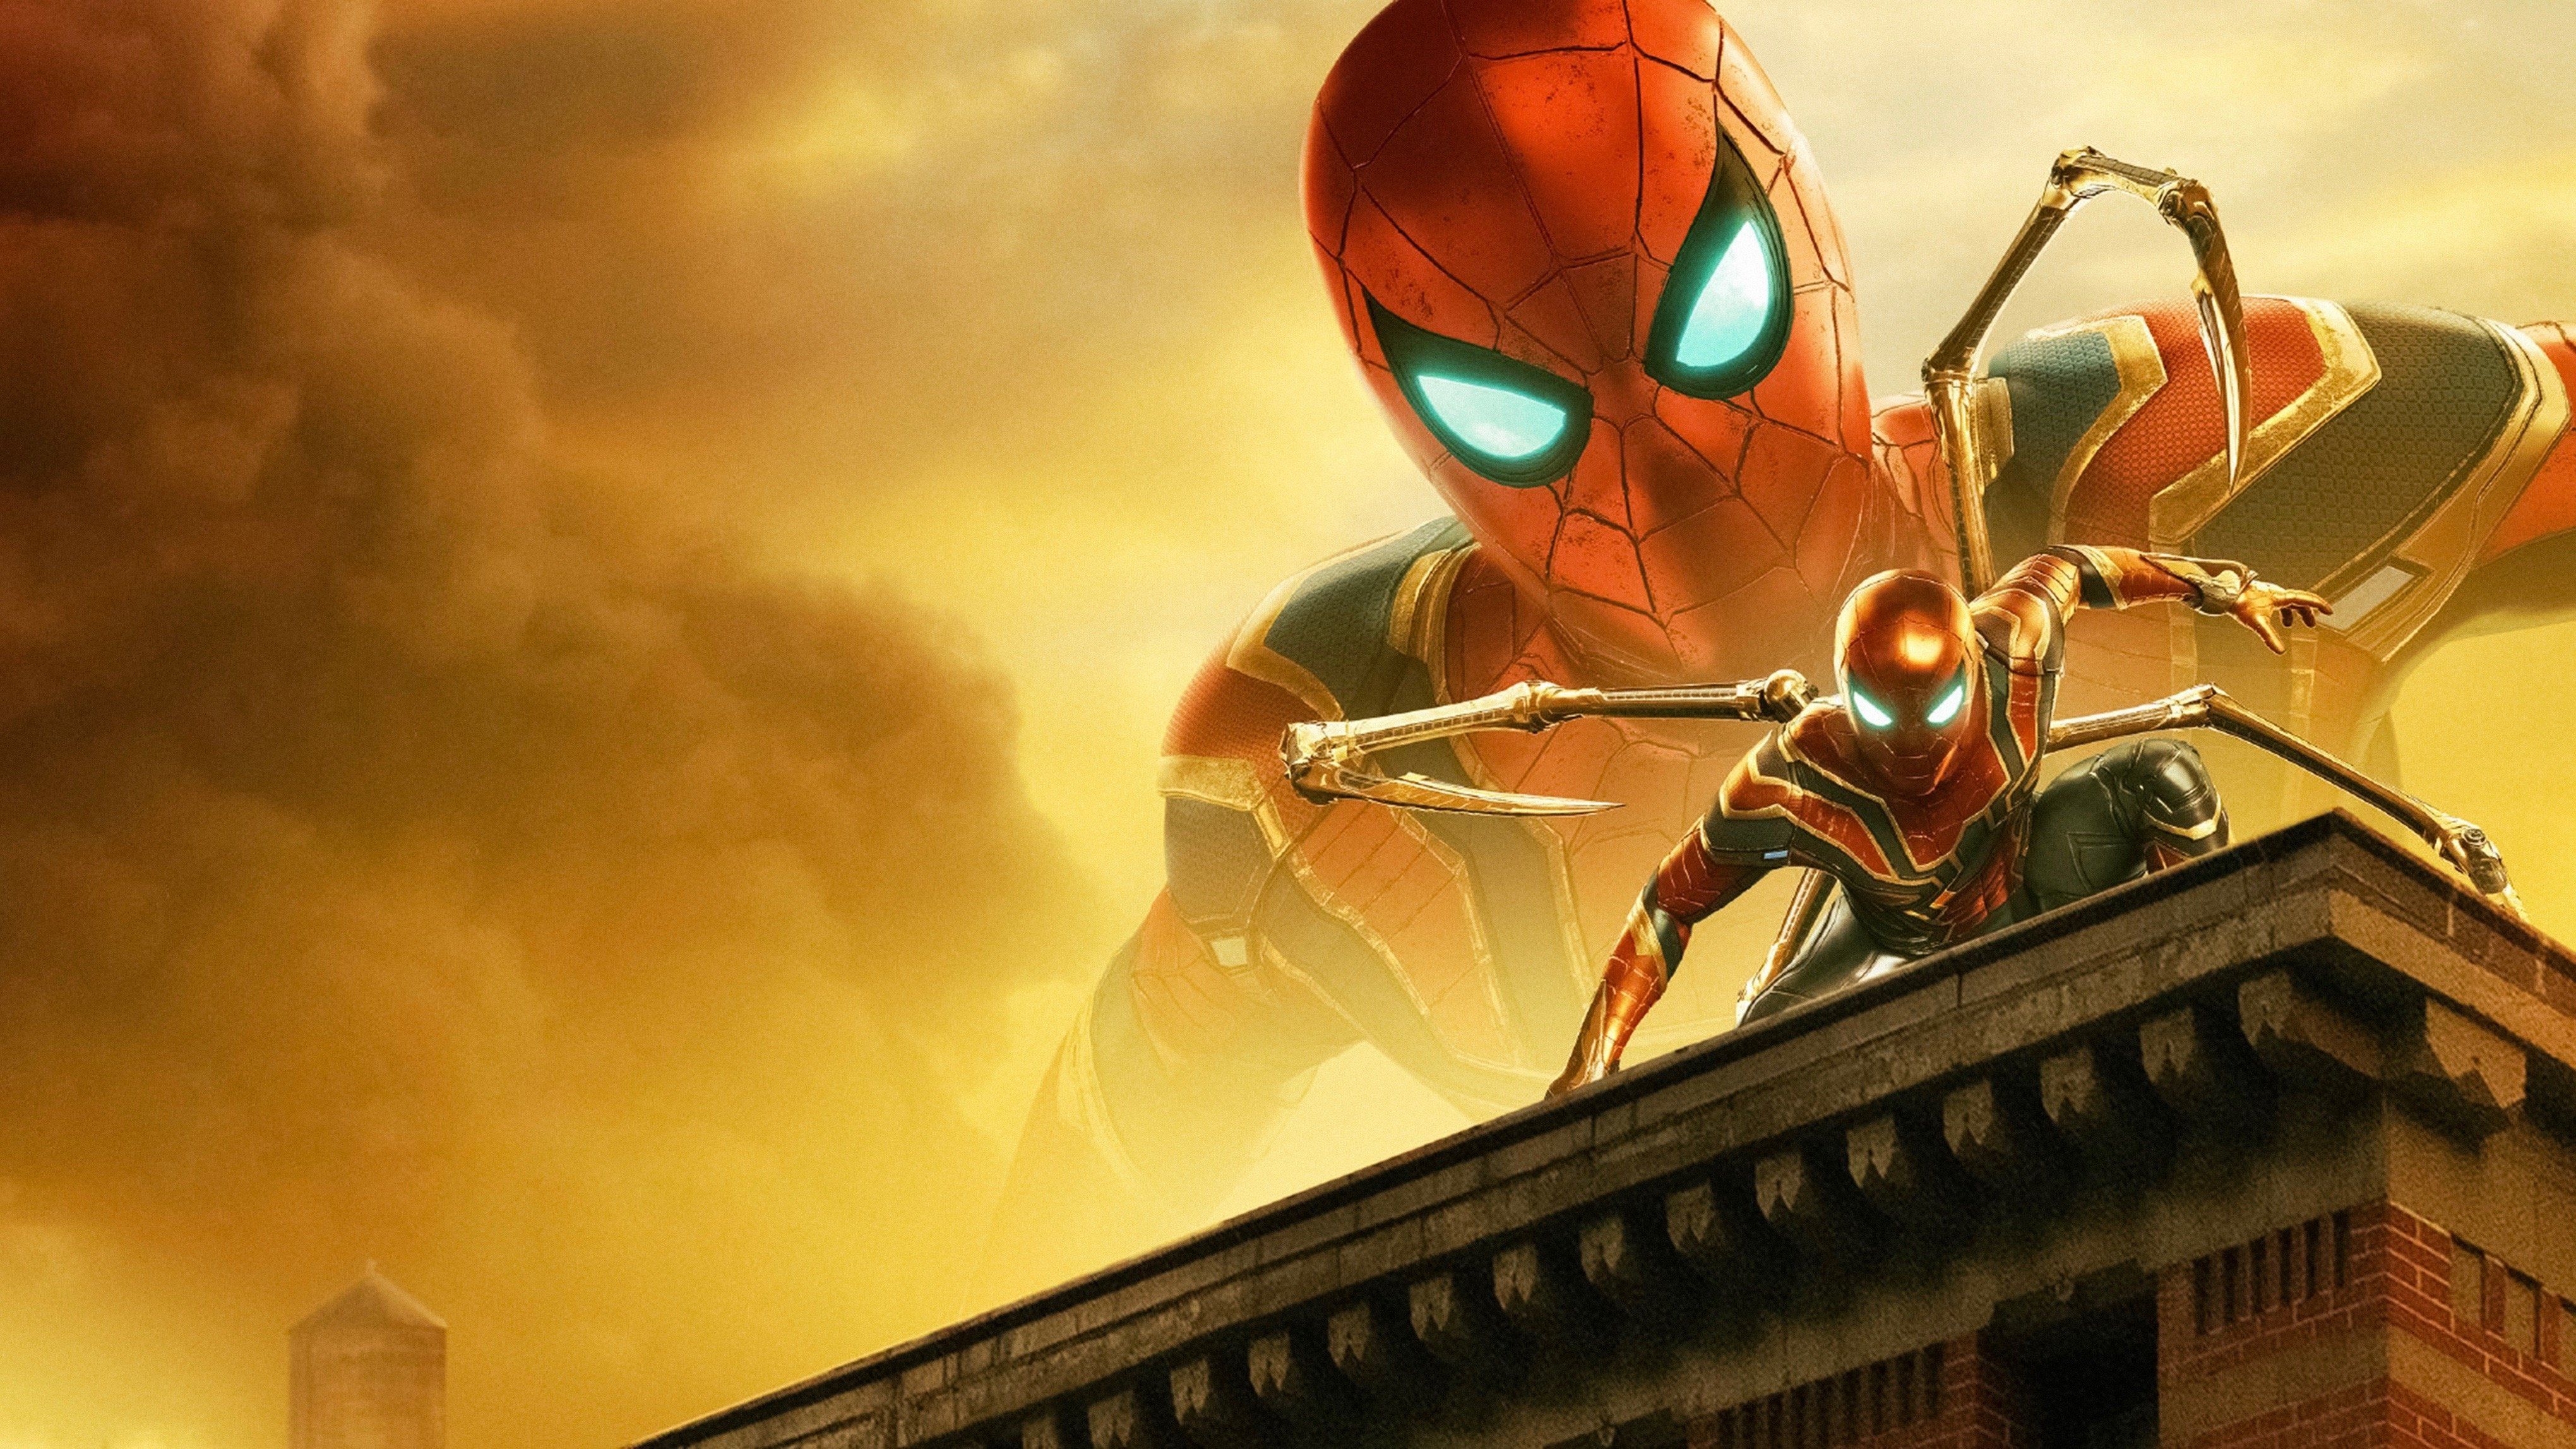 Cool Spider Man Far From Home Wallpaper HD